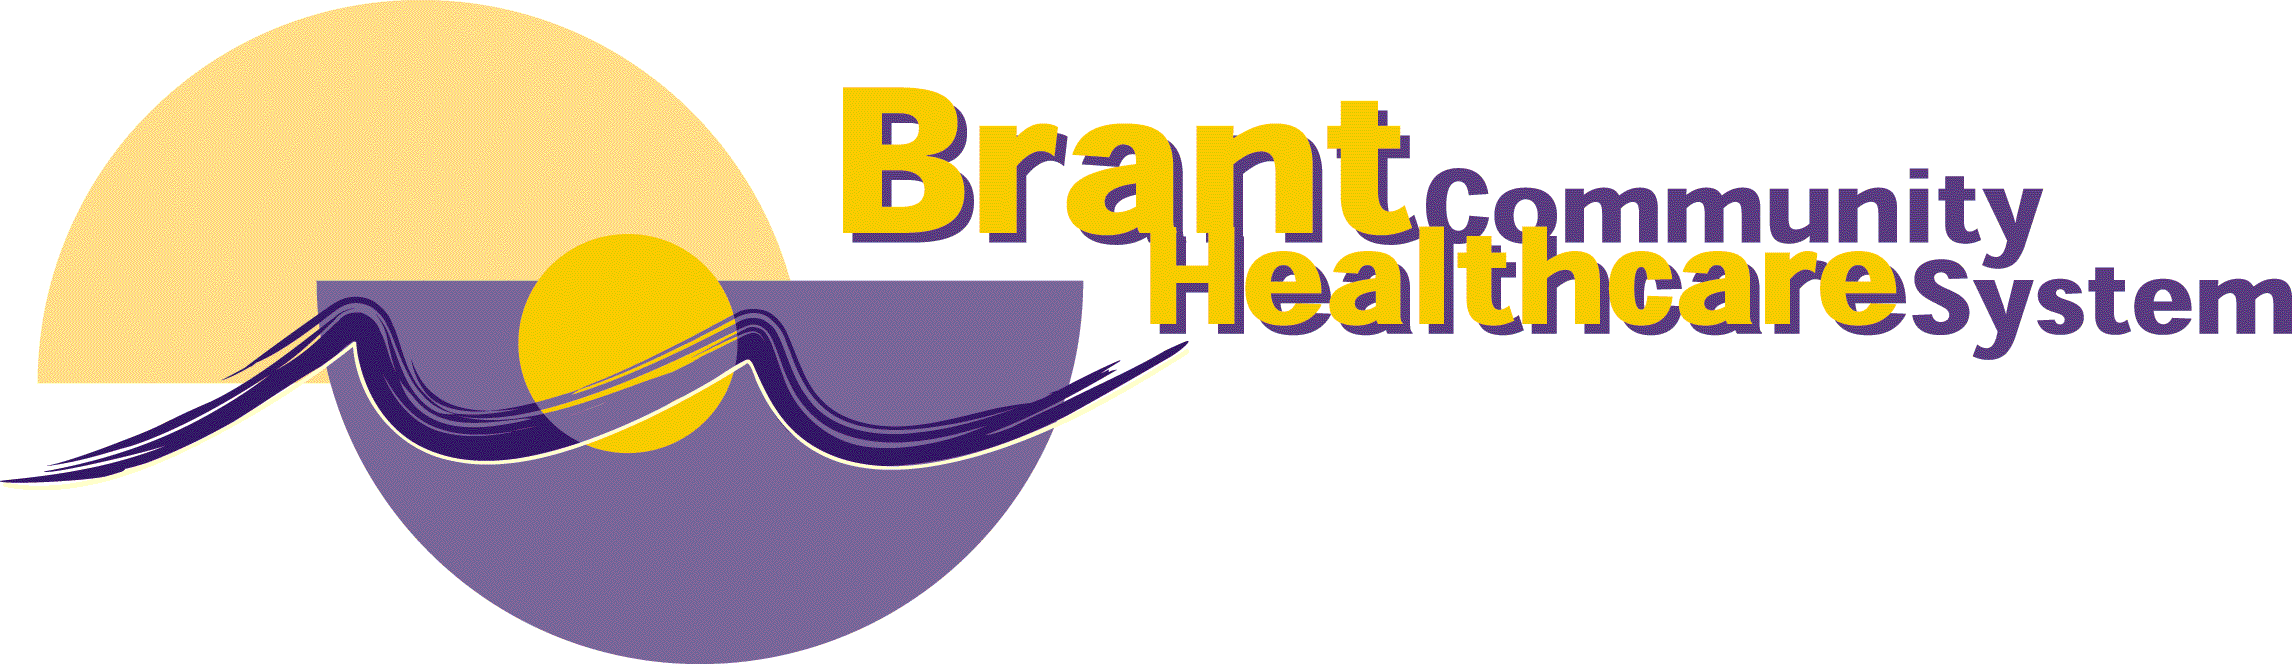 Brant Community Healthcare System BGH Sexual Assault/Domestic Violence Care Team